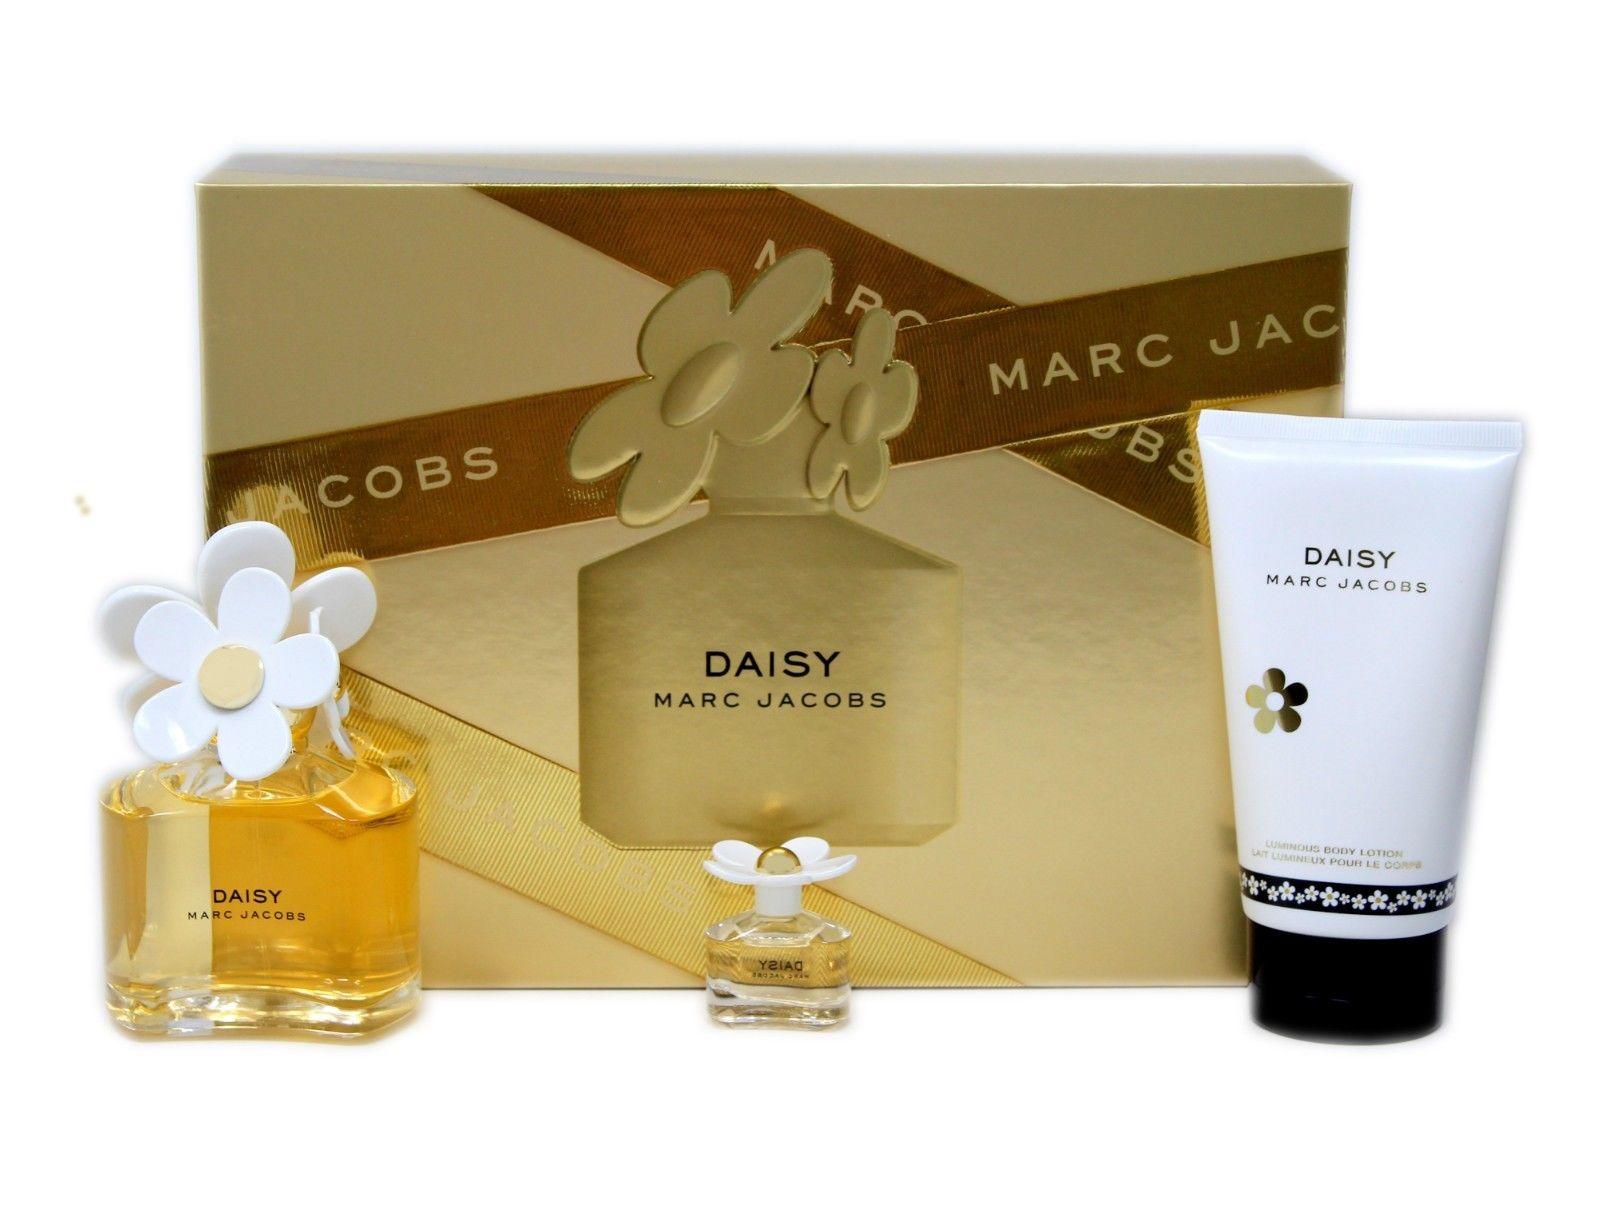 Marc Jacobs Daisy 3 piece giftset